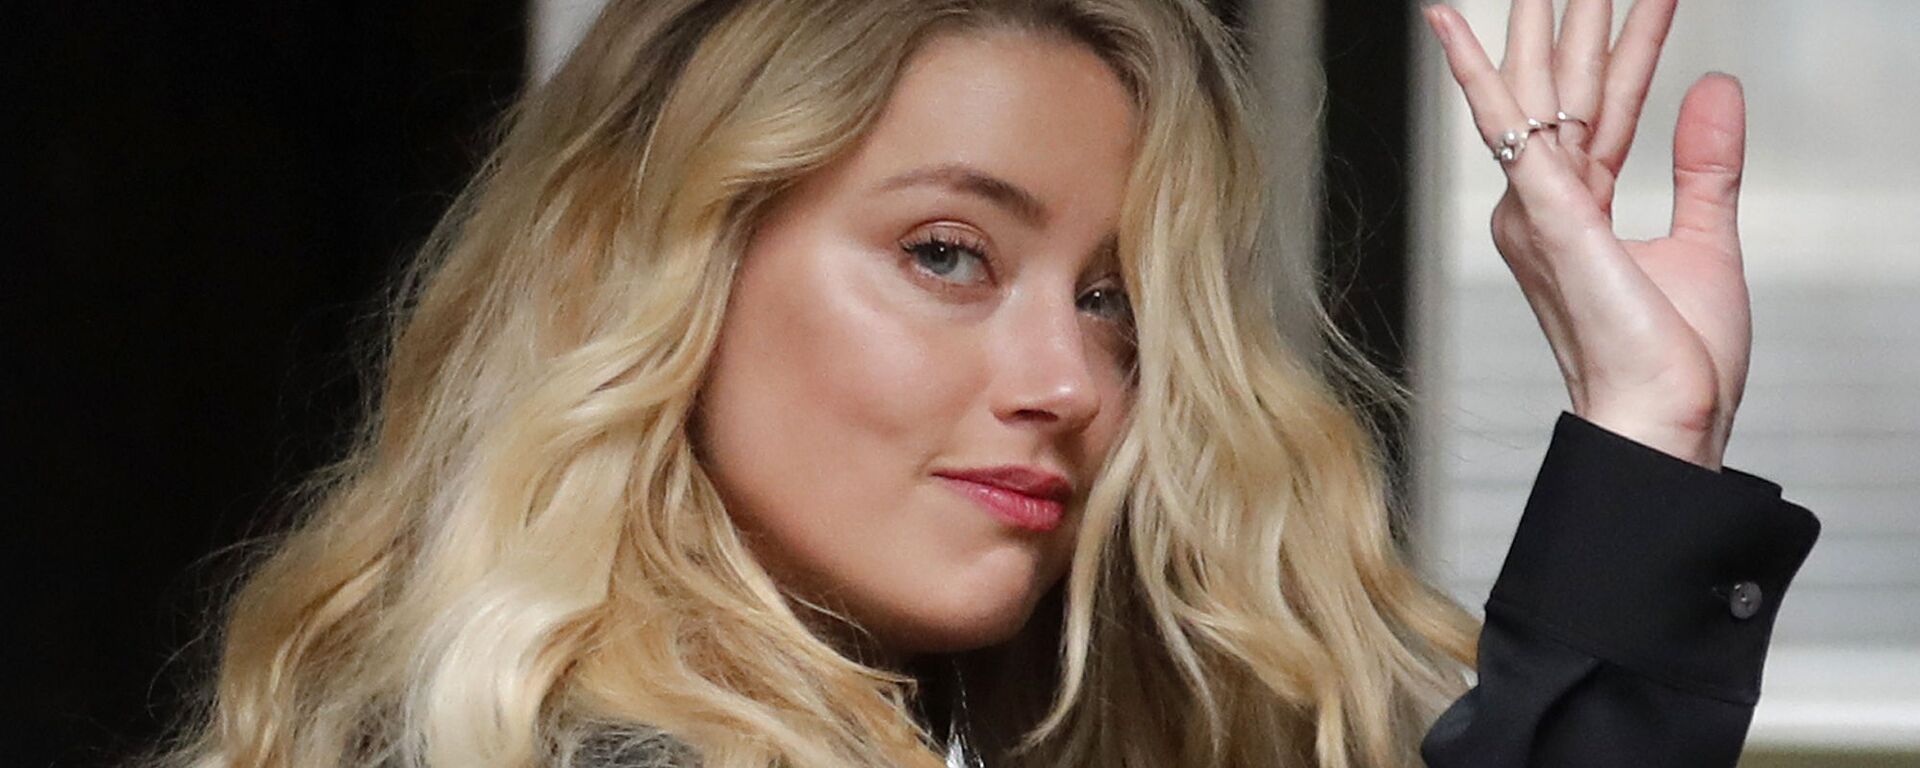 US Actress Amber Heard, former wife of actor Johnny Depp, arrives at the High Court in London, Tuesday, July 28, 2020.  - Sputnik International, 1920, 03.06.2022